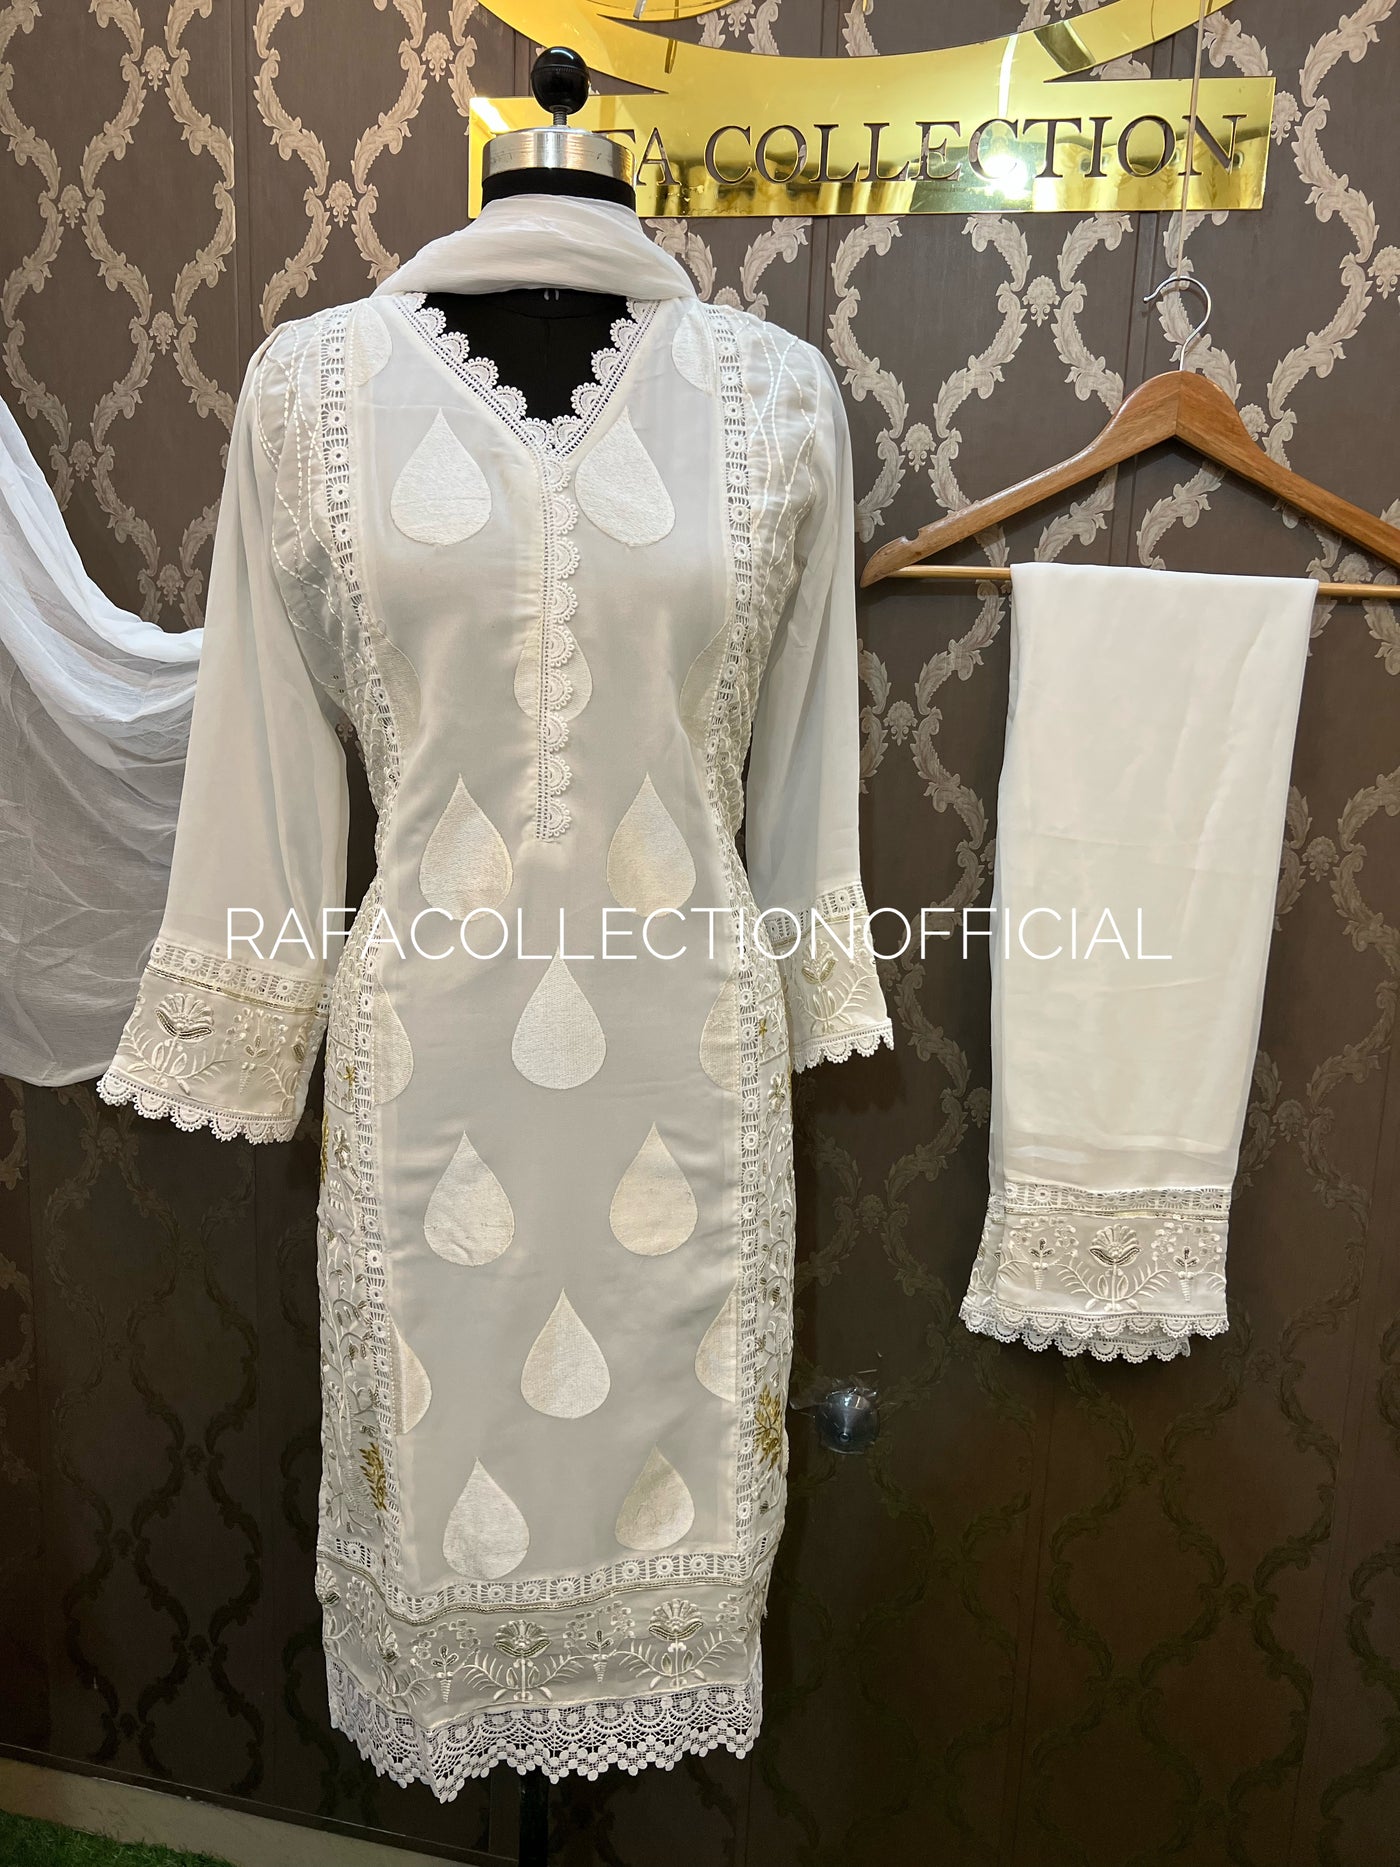 Embroided Paki formals